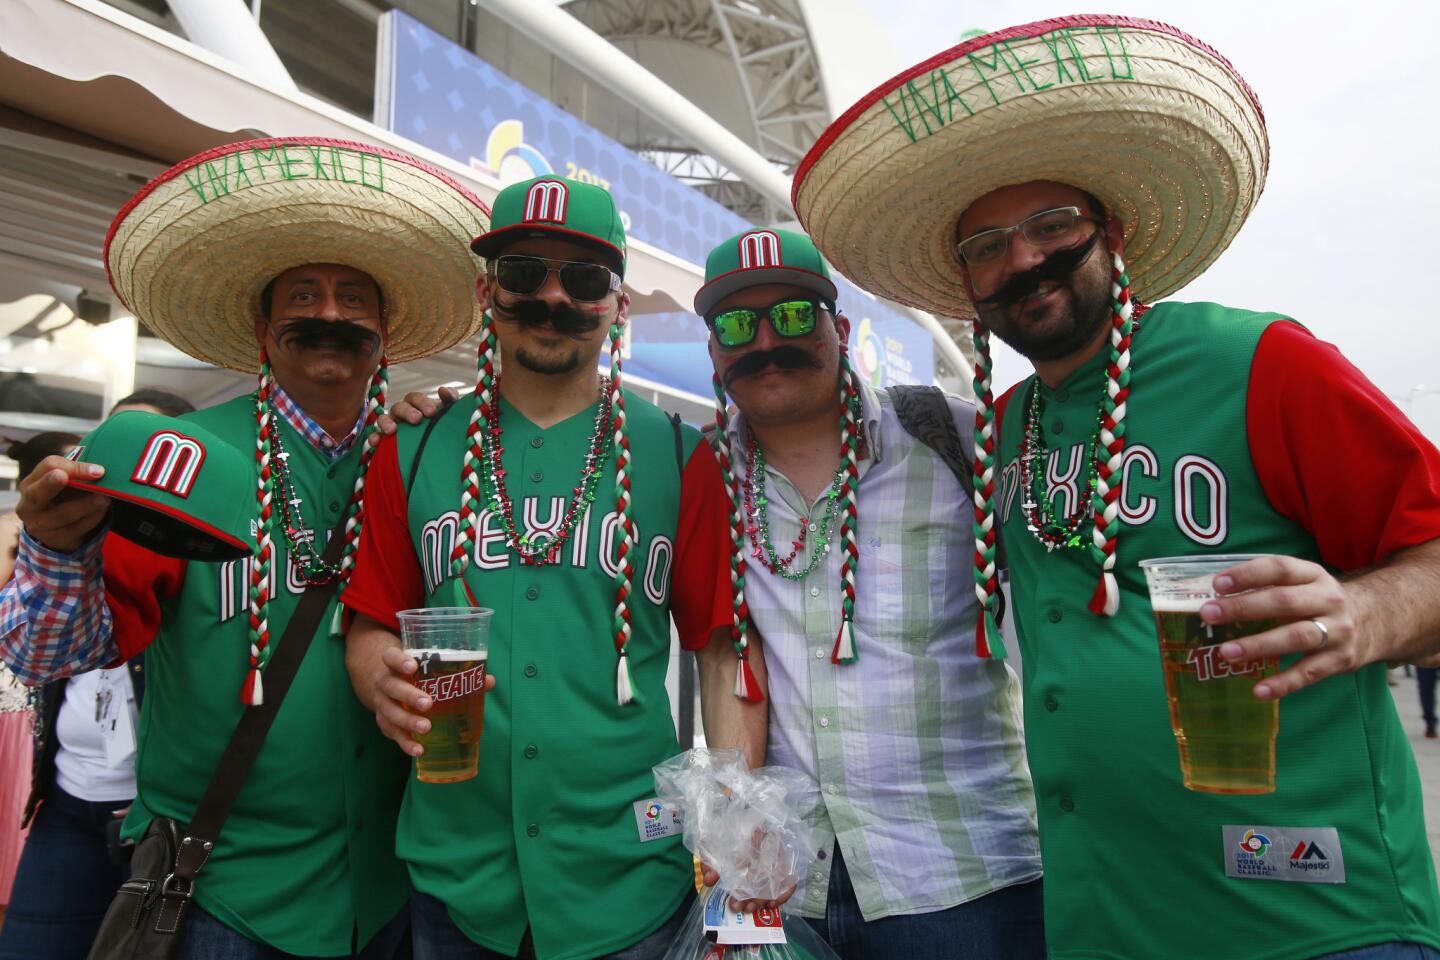 ZAPOPAN, MEXICO - MARCH 09: Fans of Mexico pose for pictures before the World Baseball Classic Pool D Game 1 between Italy and Mexico at Panamericano Stadium on March 09, 2017 in Zapopan, Mexico. (Photo by Miguel Tovar/Getty Images) ** OUTS - ELSENT, FPG, CM - OUTS * NM, PH, VA if sourced by CT, LA or MoD **